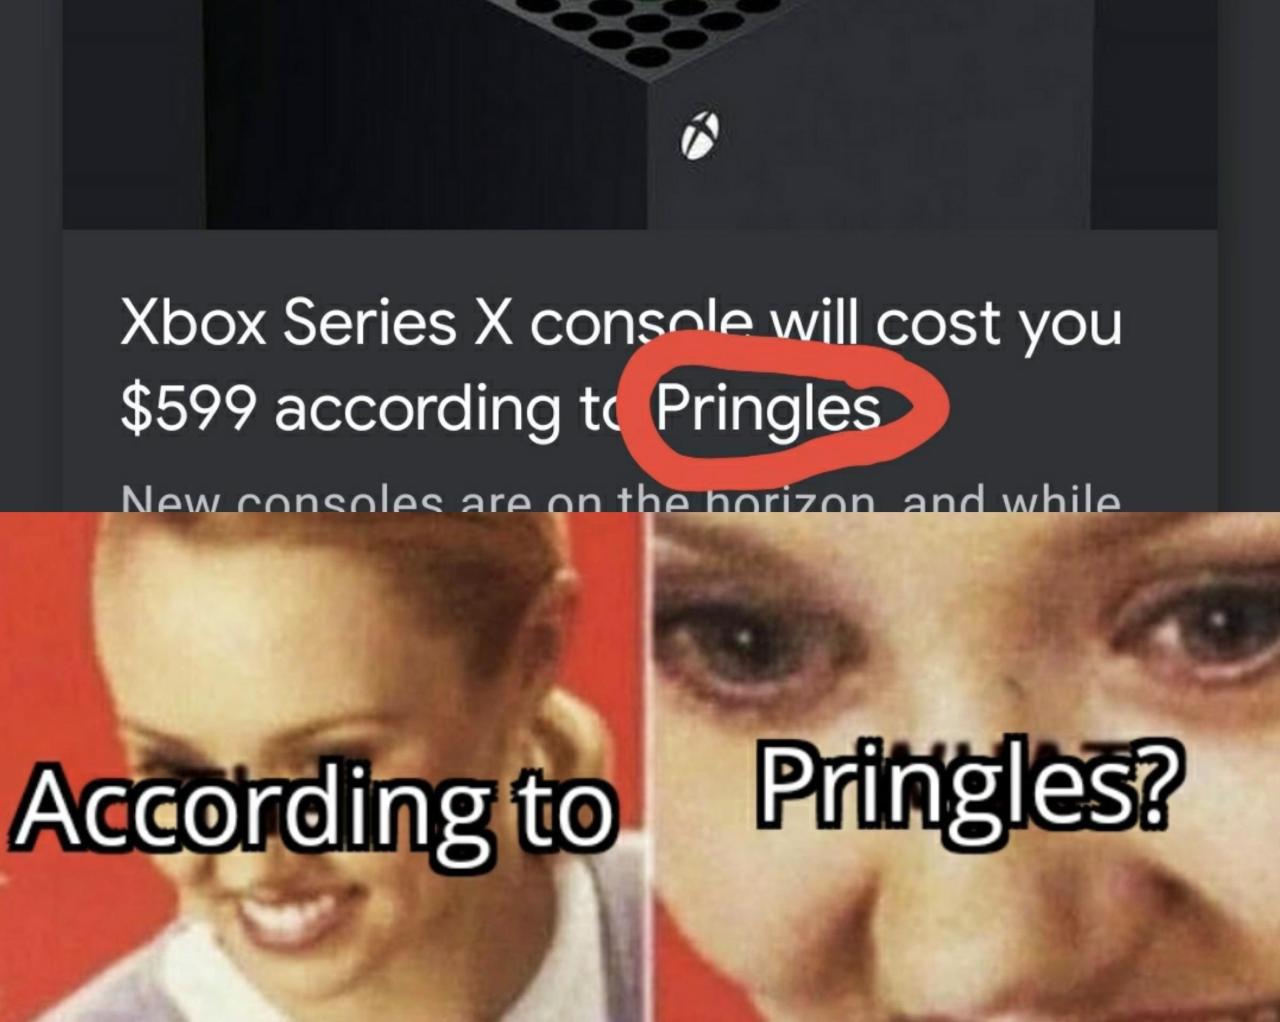 funny gaming memes - xbox series x console will cost you $599 according to pringles - Xbox Series X console will cost you $599 according to Pringles New consoles are on the horizon and while According to Pringles?